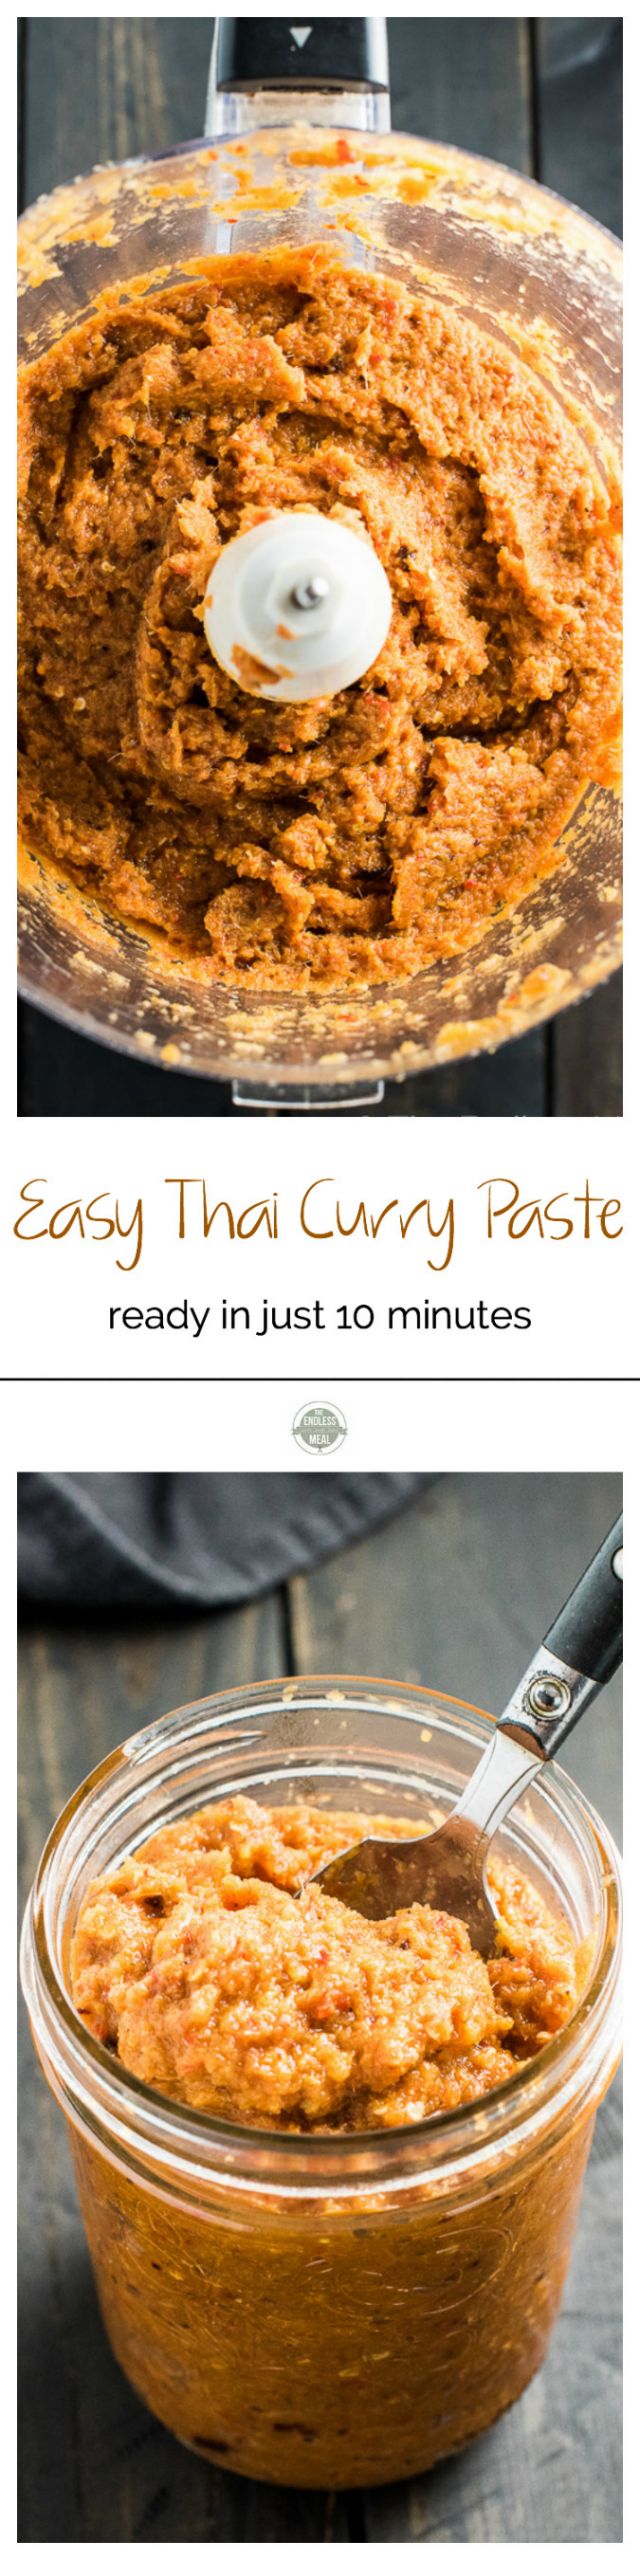 Red Thai Curry Paste Recipes
 Easy Thai Red Curry Paste Recipe